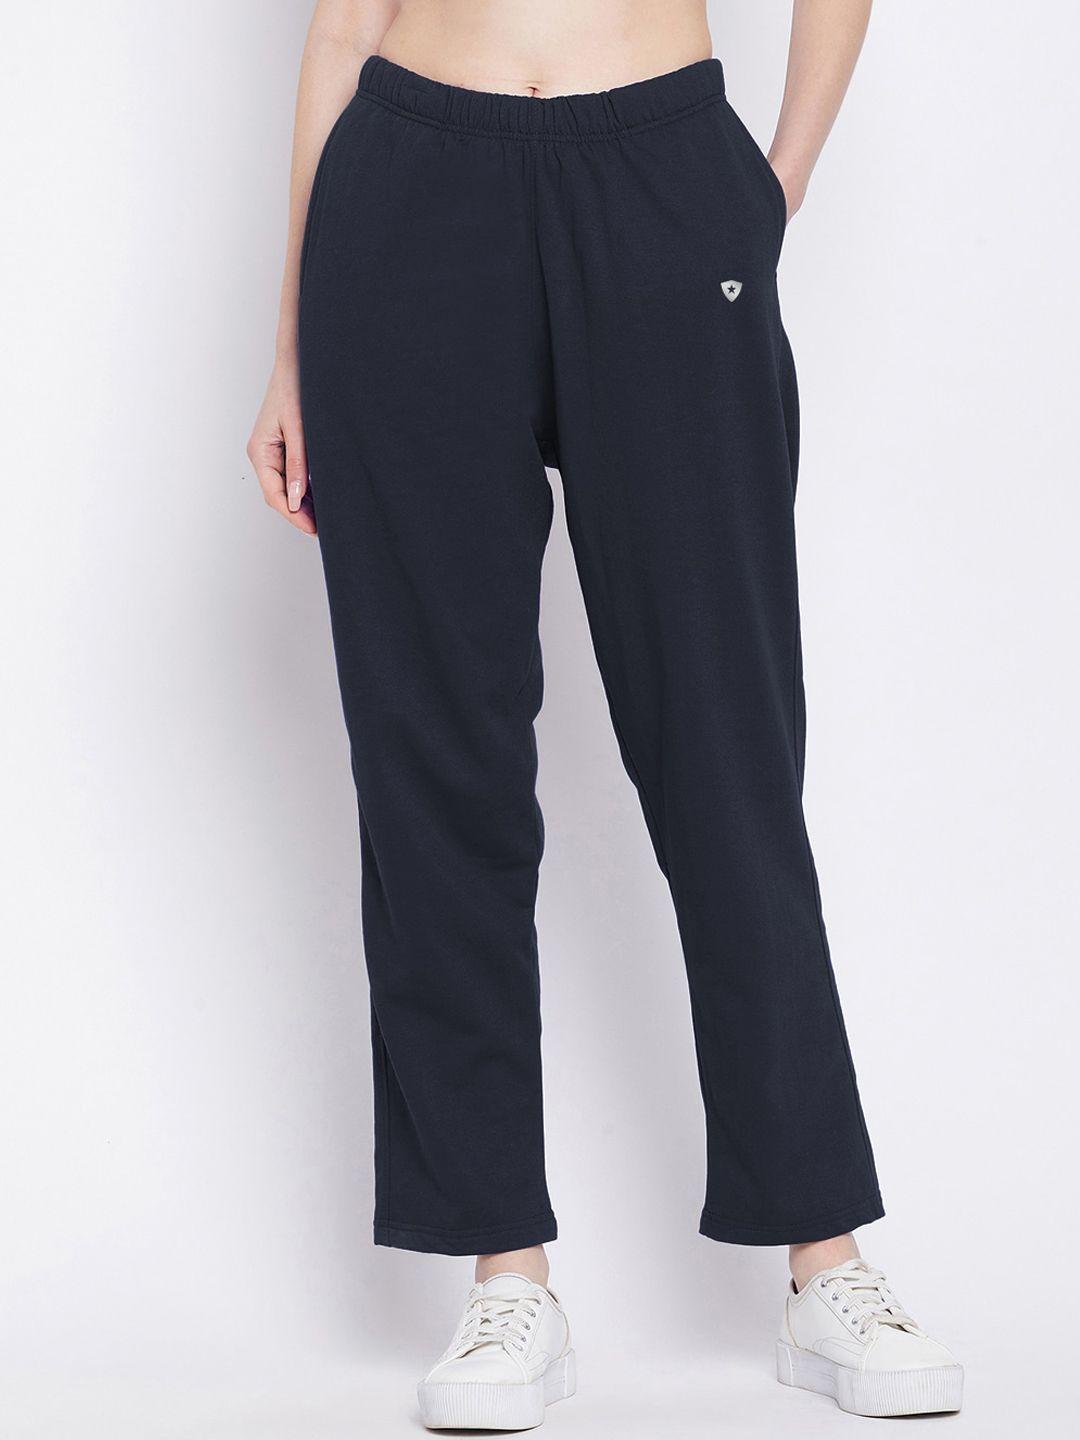 french flexious women mid-rise track pants